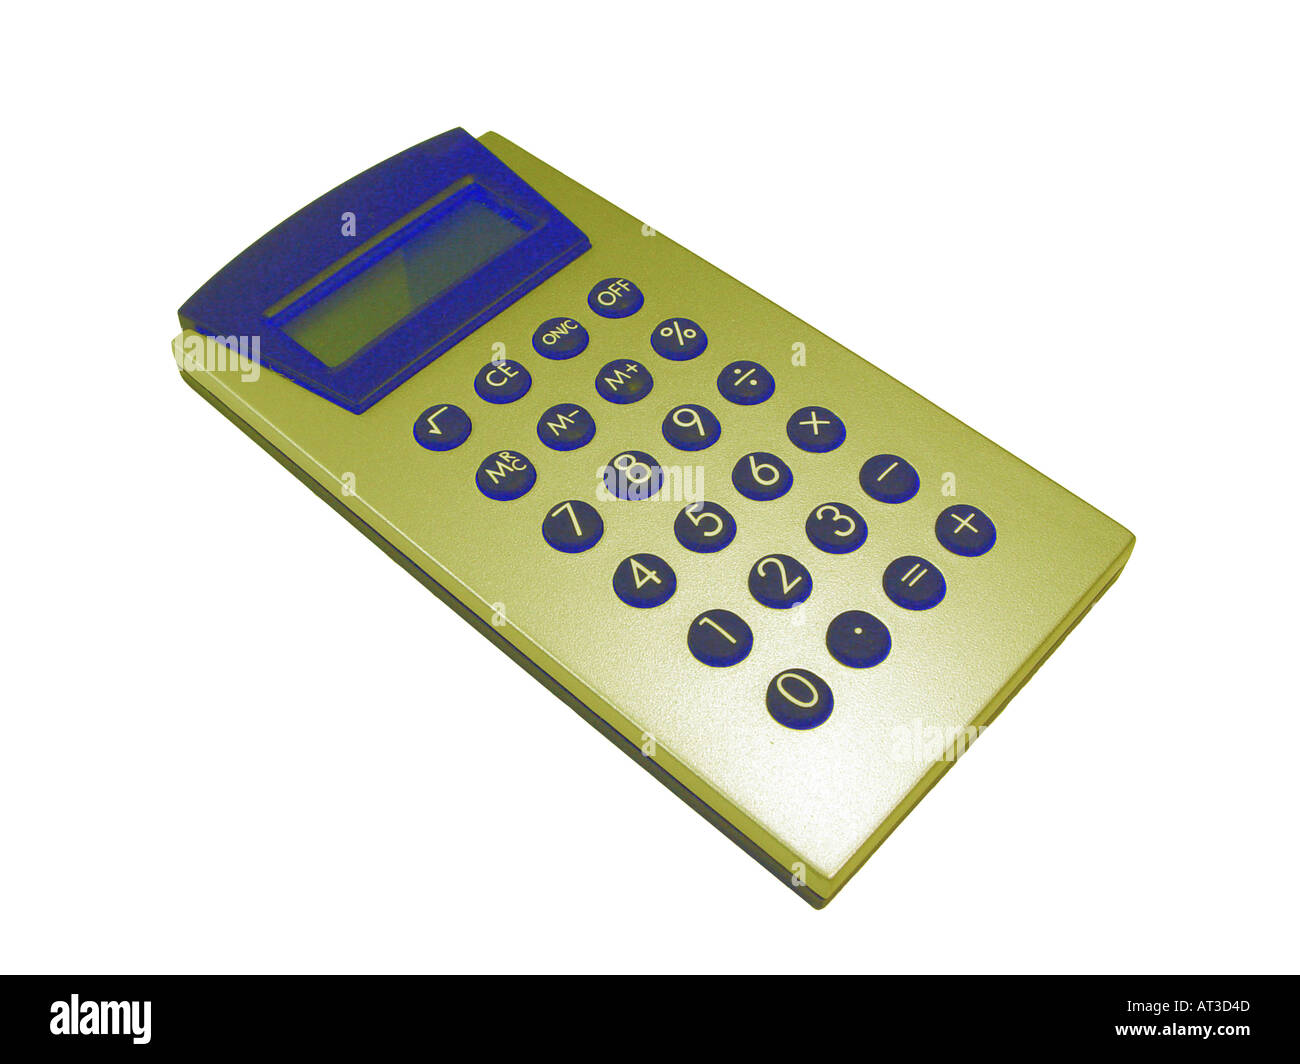 Pocket calculator as symbol for computations e g for the pension system taxes finances Stock Photo